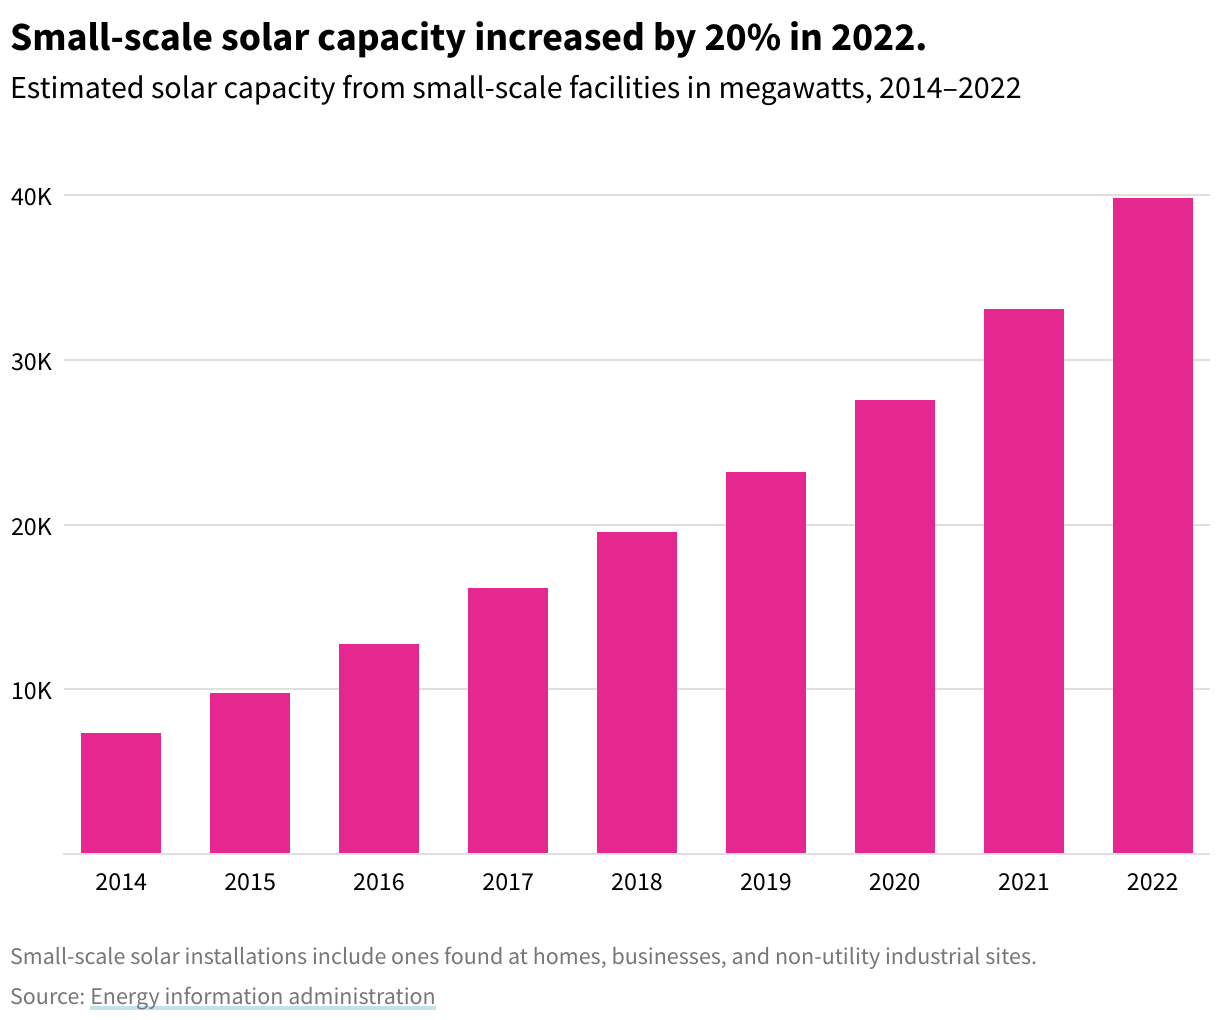 Bar chart showing increase in small-scale solar capacity over time, starting at 7.3K in 2014, growing steadily to 39.8K in 2022